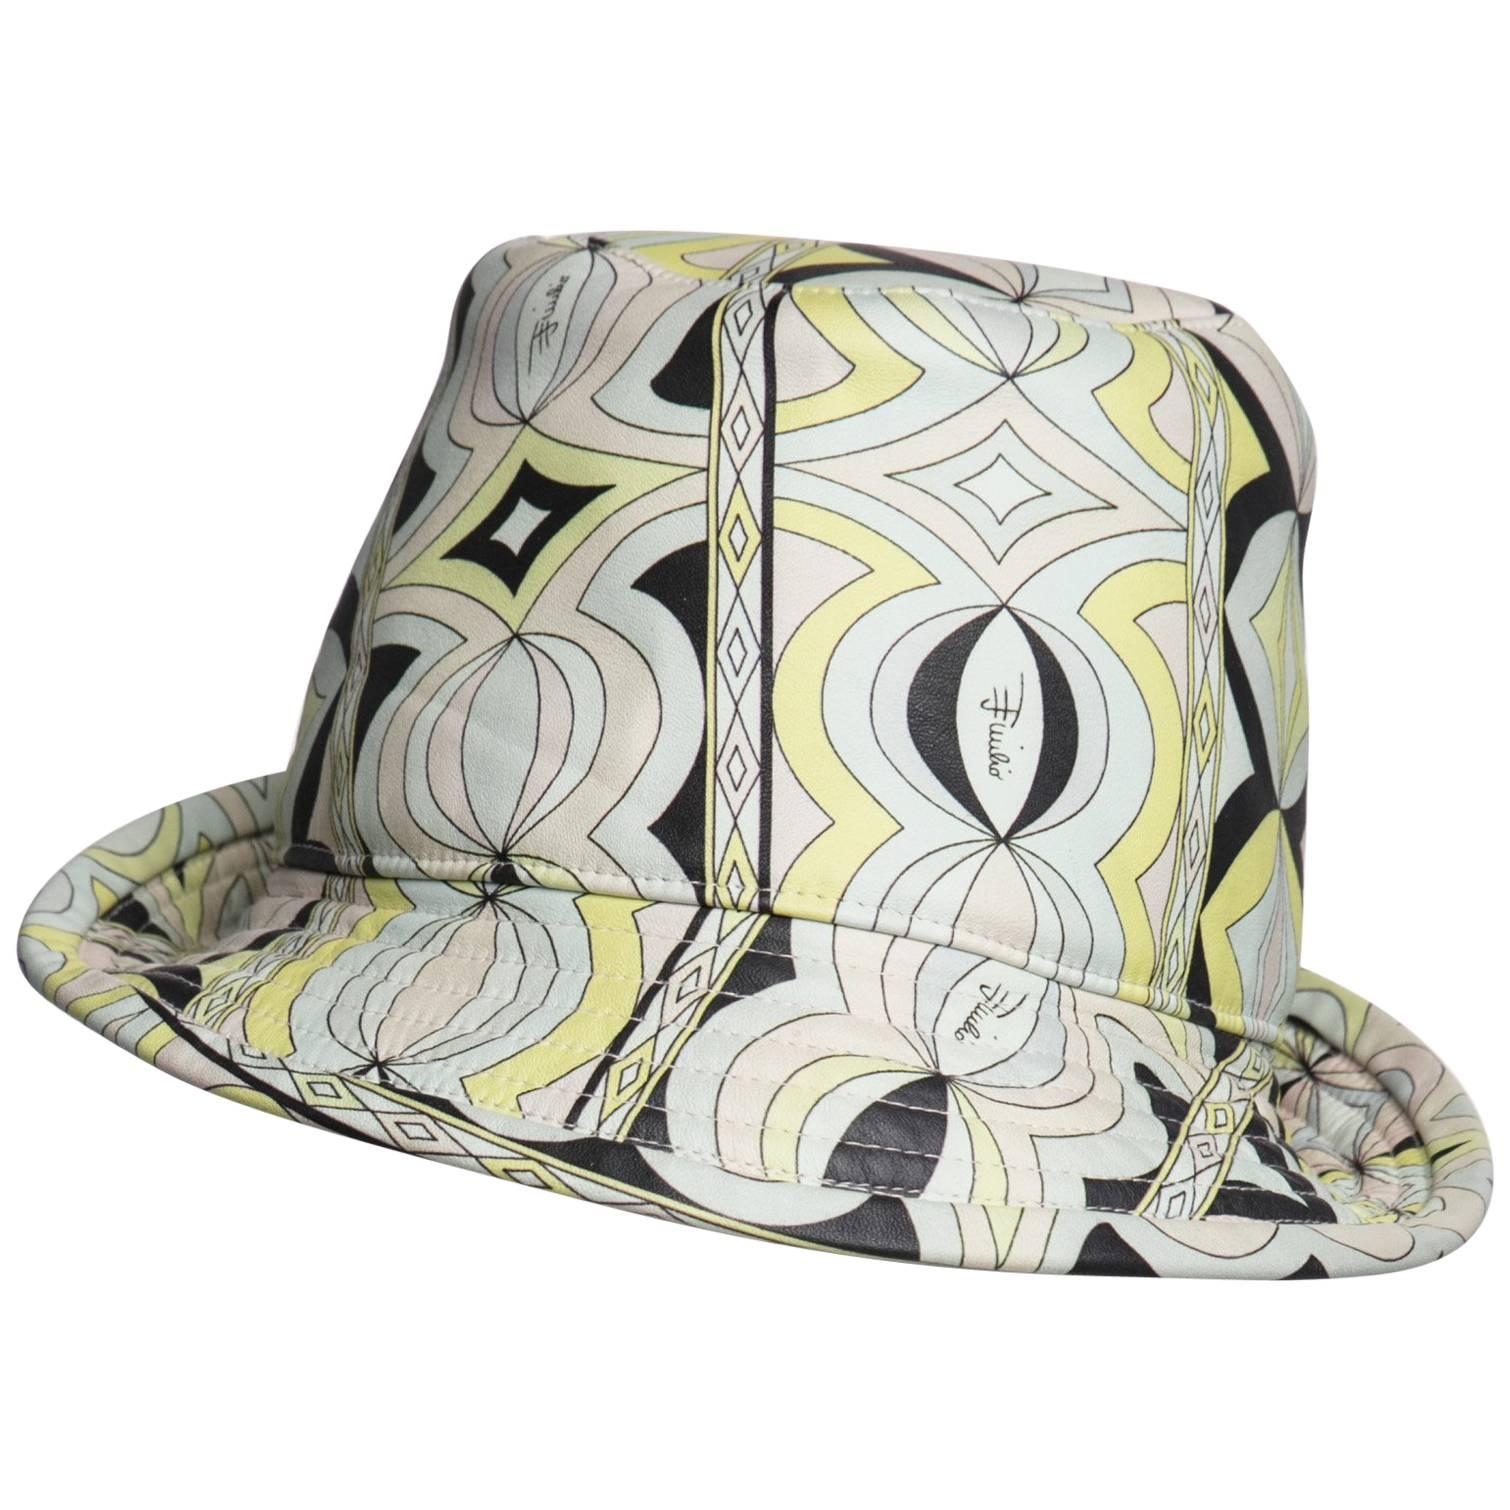 Emilio Pucci Sorbet Colors Printed Leather Fedora Hat